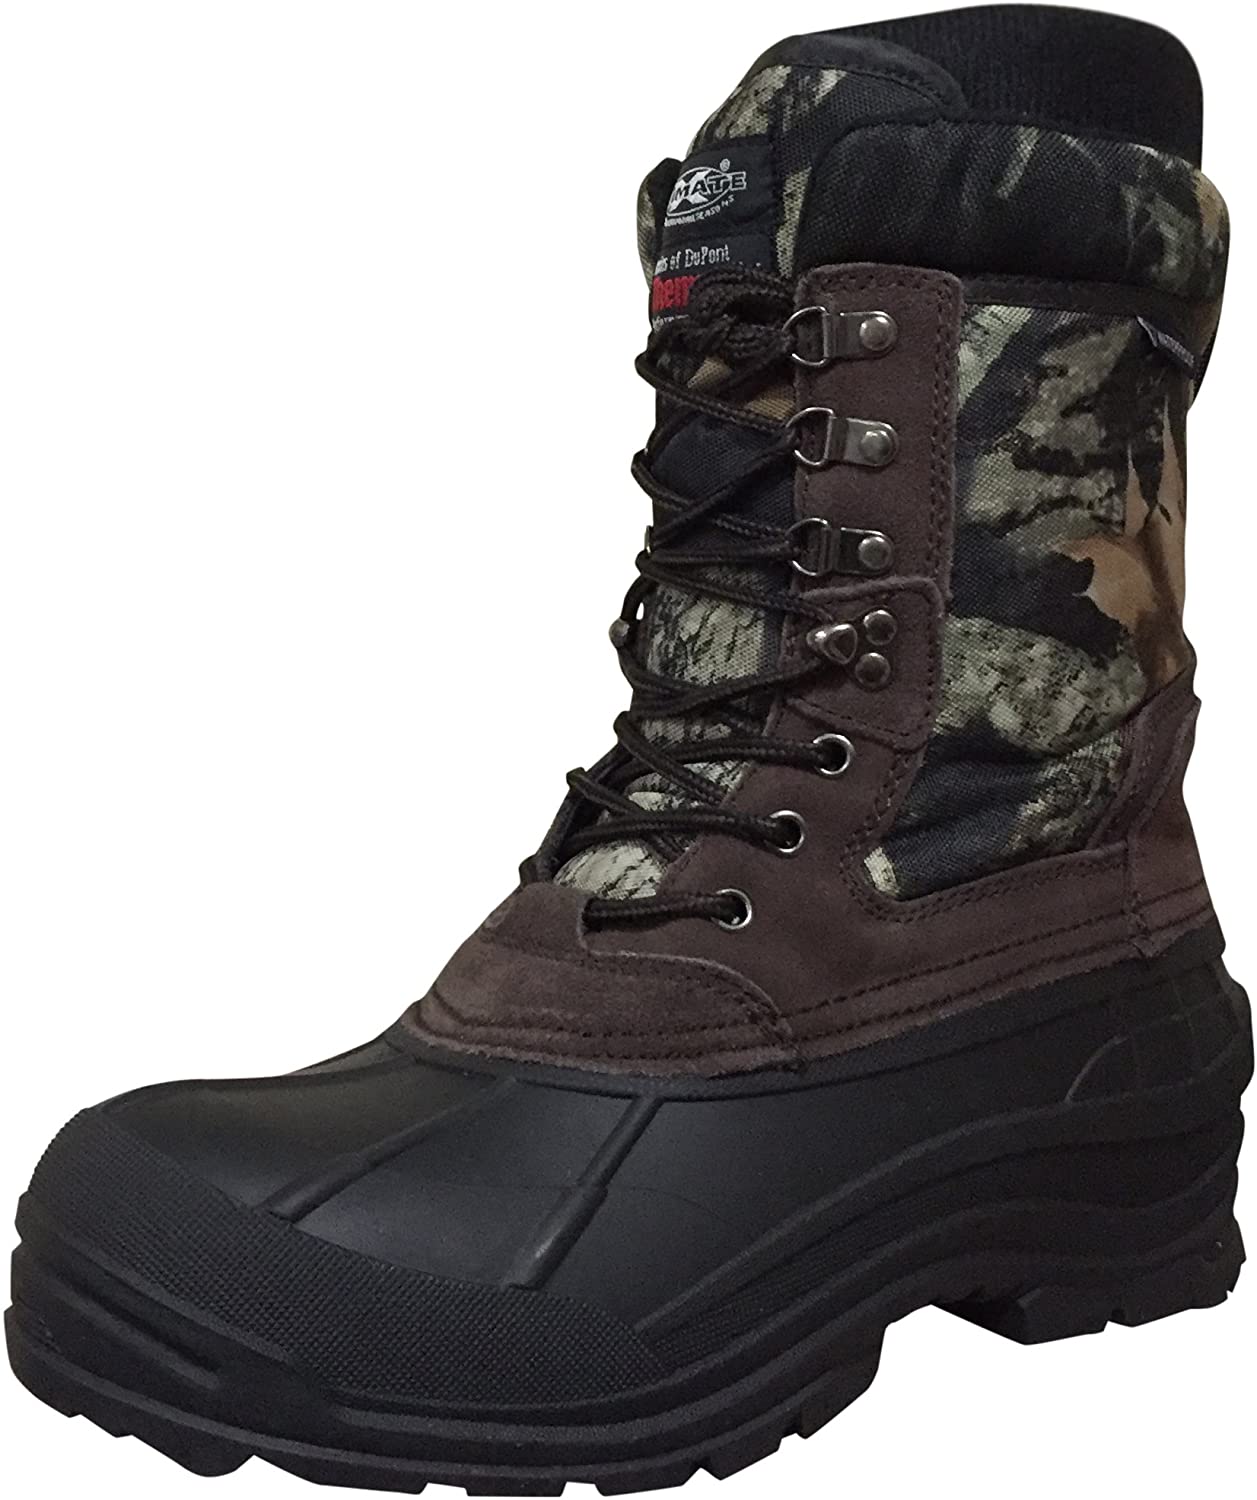 Men's Winter Boots 10" Camouflage Thermolite Insulated Hunting Snow Shoes - image 1 of 6